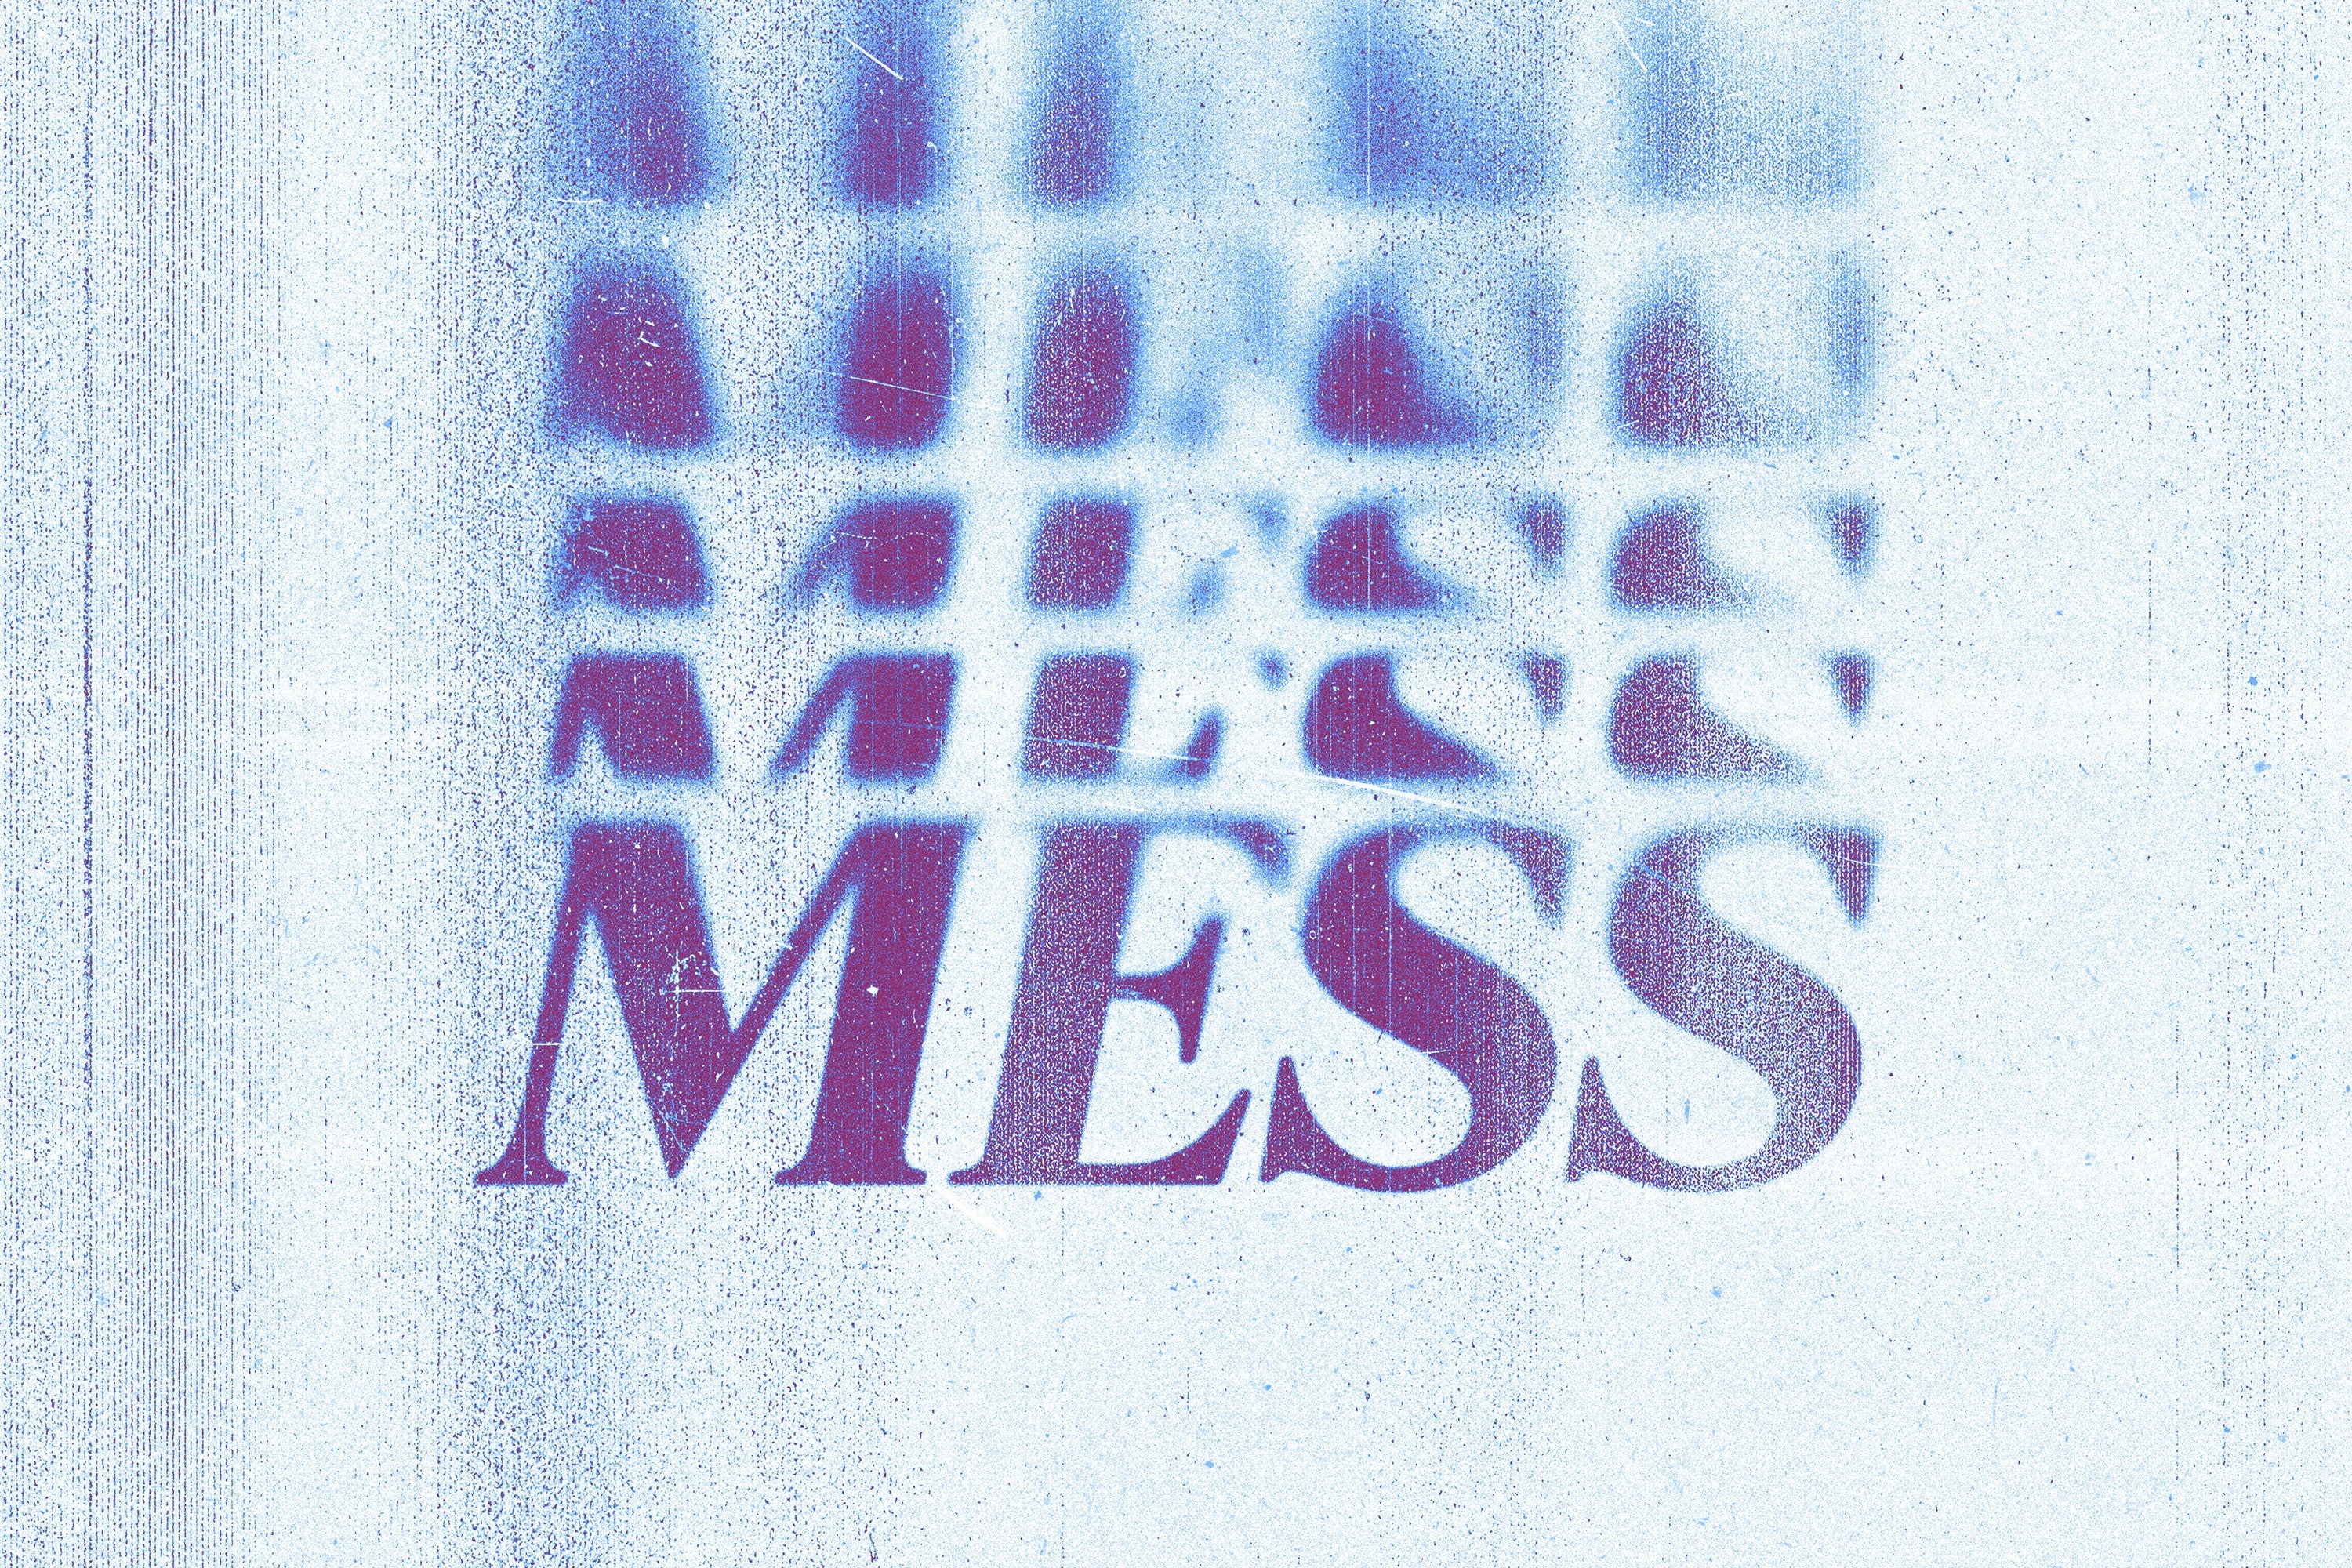 Printed Mess Text & Logo Effects